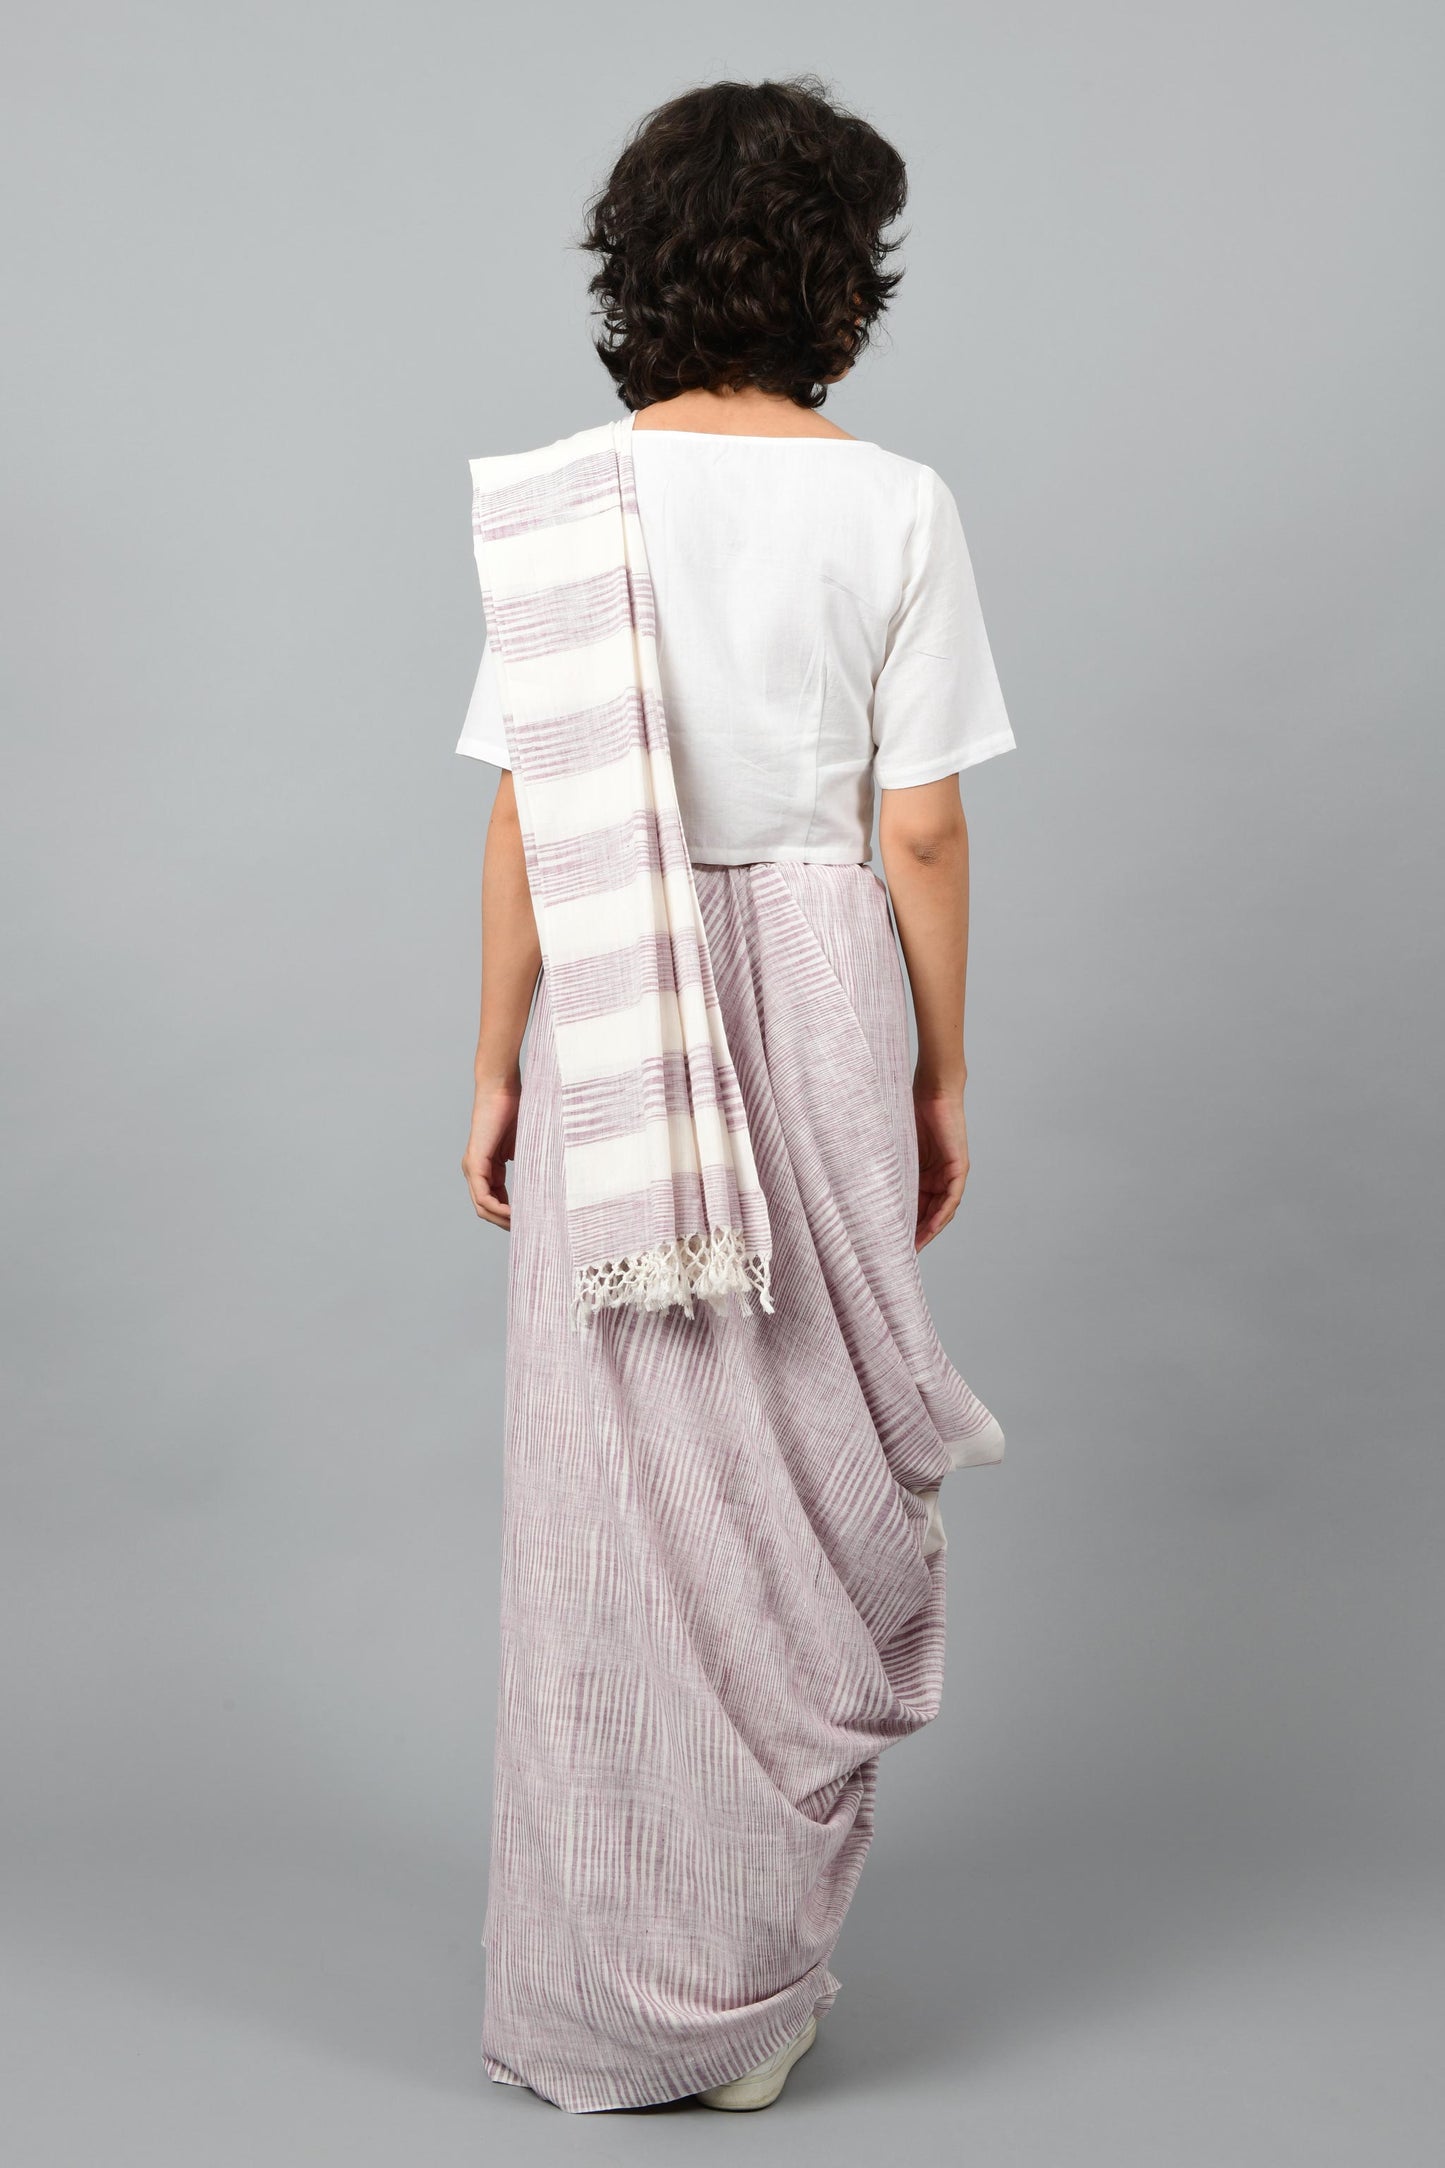 Back pose of a female womenswear fashion model draped in a purple & white space dyed homespun and handwoven cotton saree by Cotton Rack.